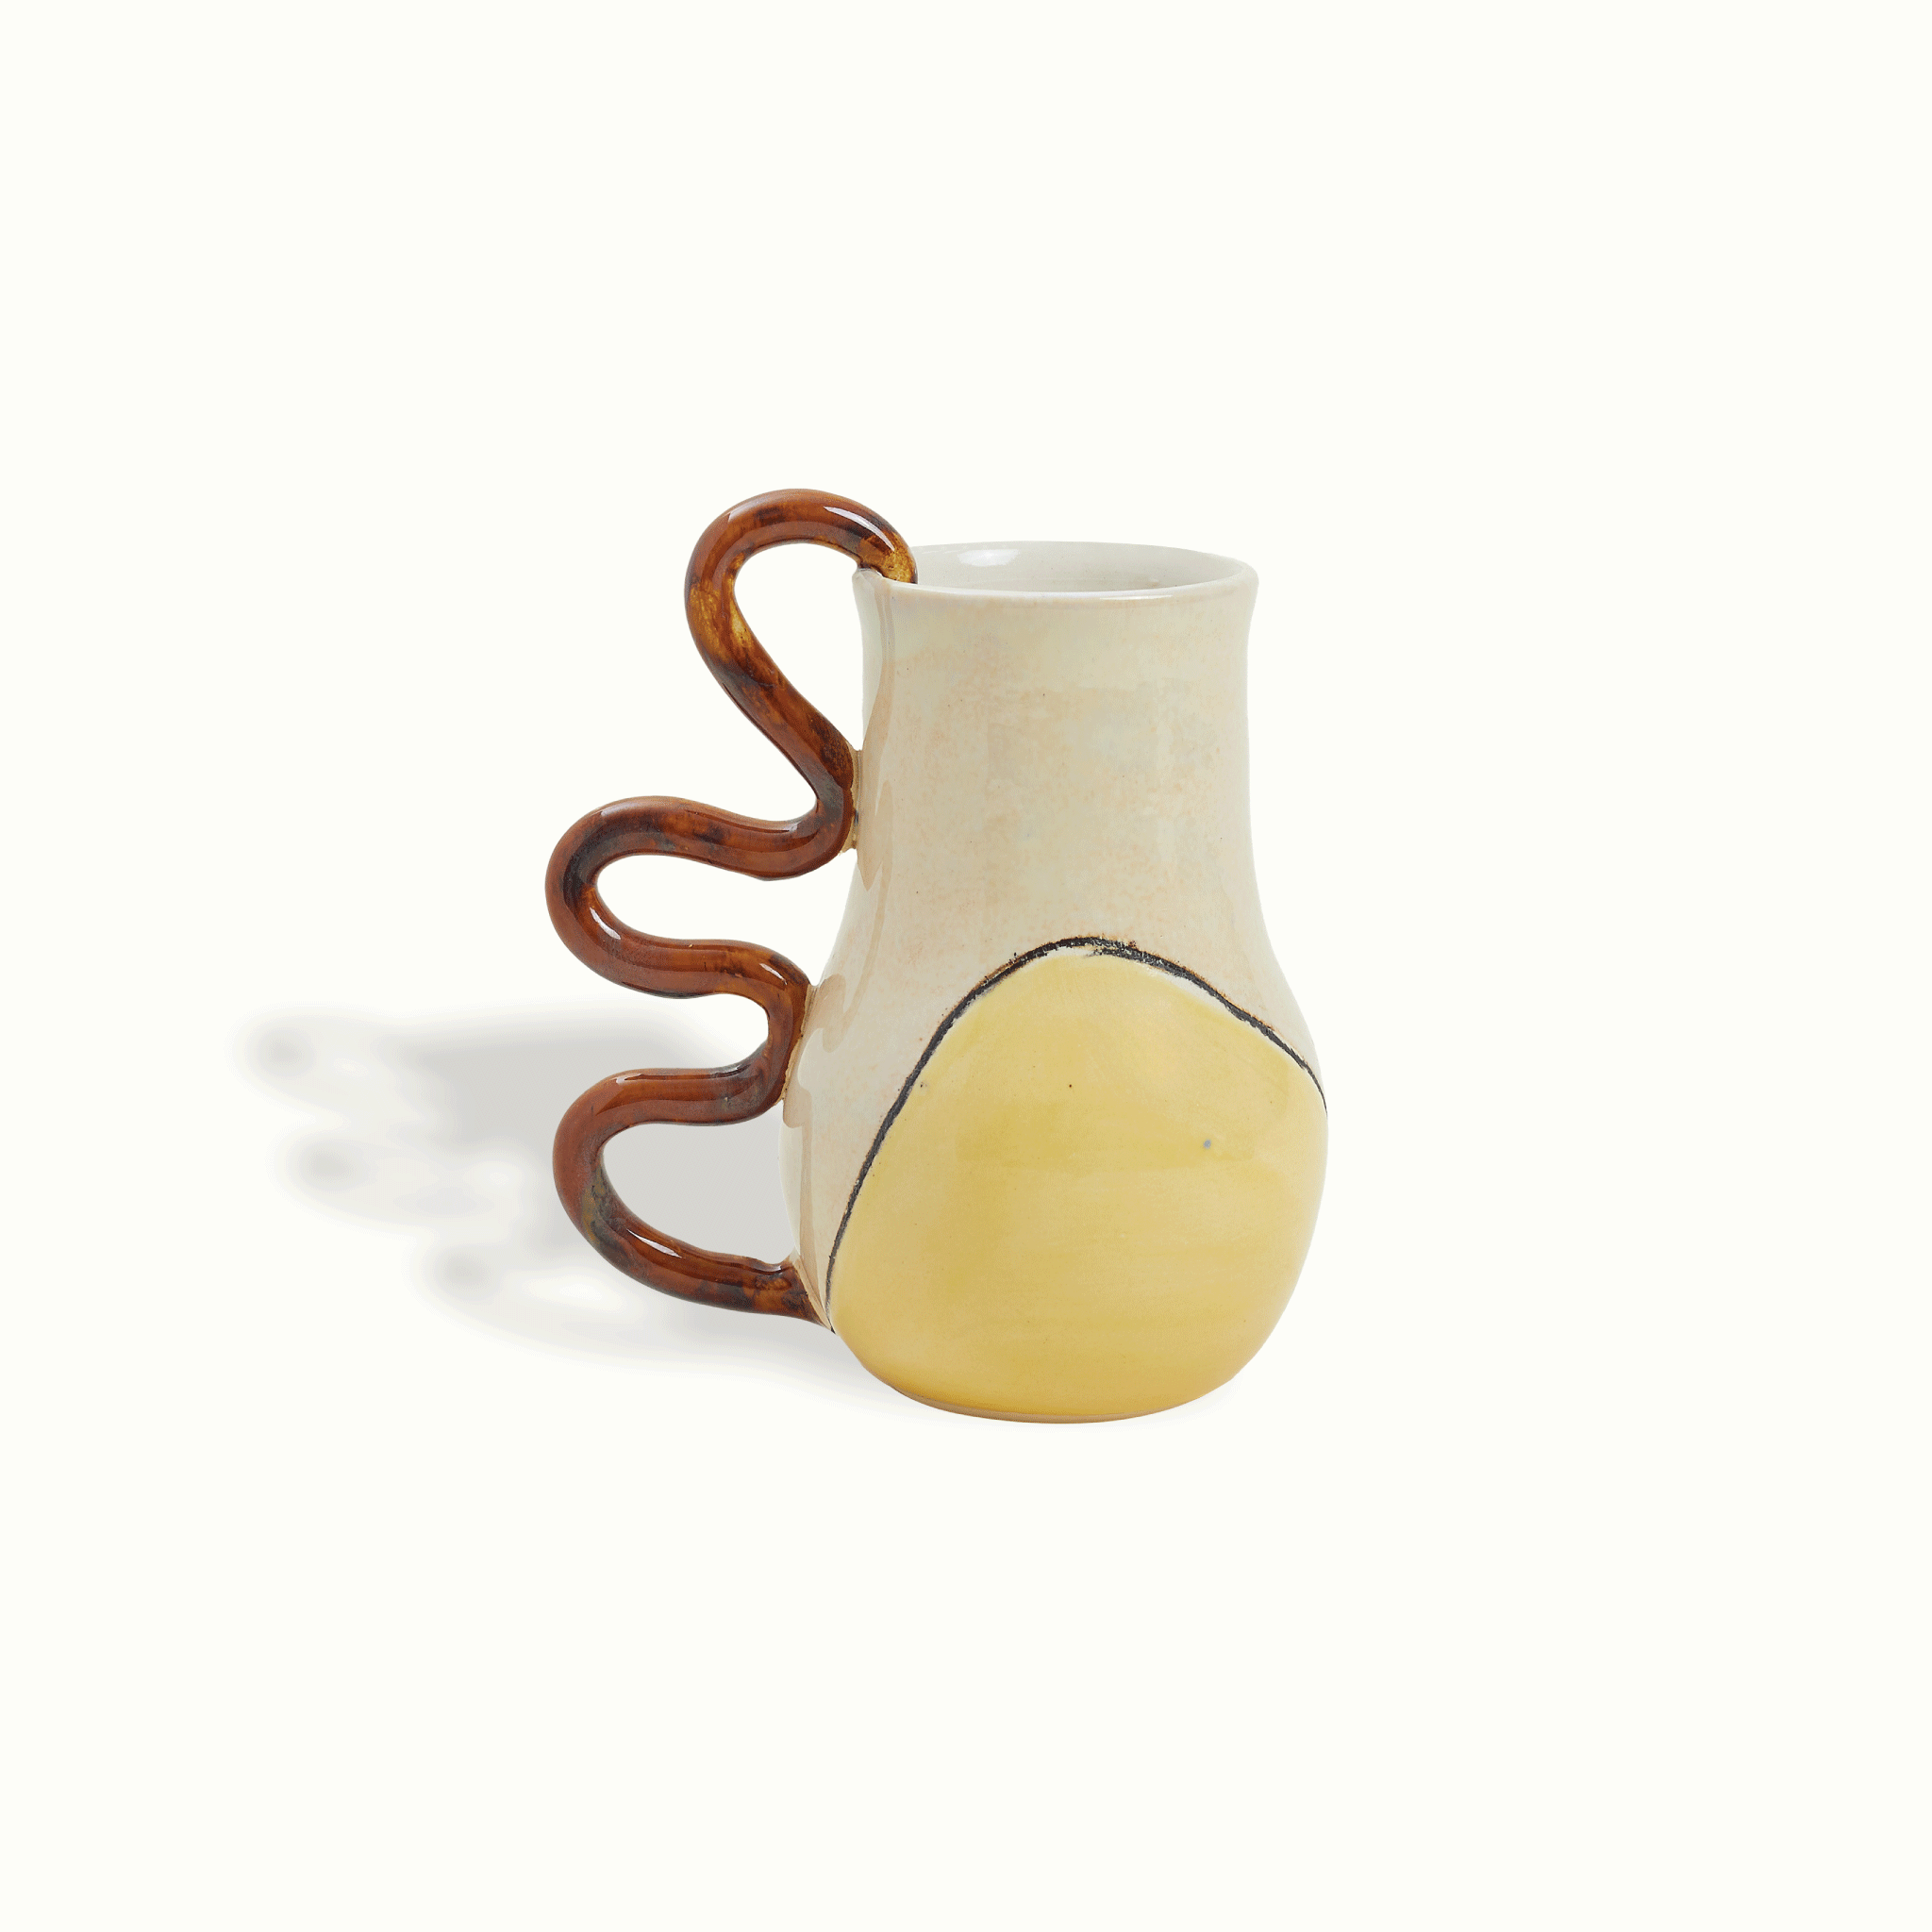 Single Squiggle Handle Ceramic Vase Handcrafted Adriana Lemus for Farmhouse Paso Robles by Nomada Deco